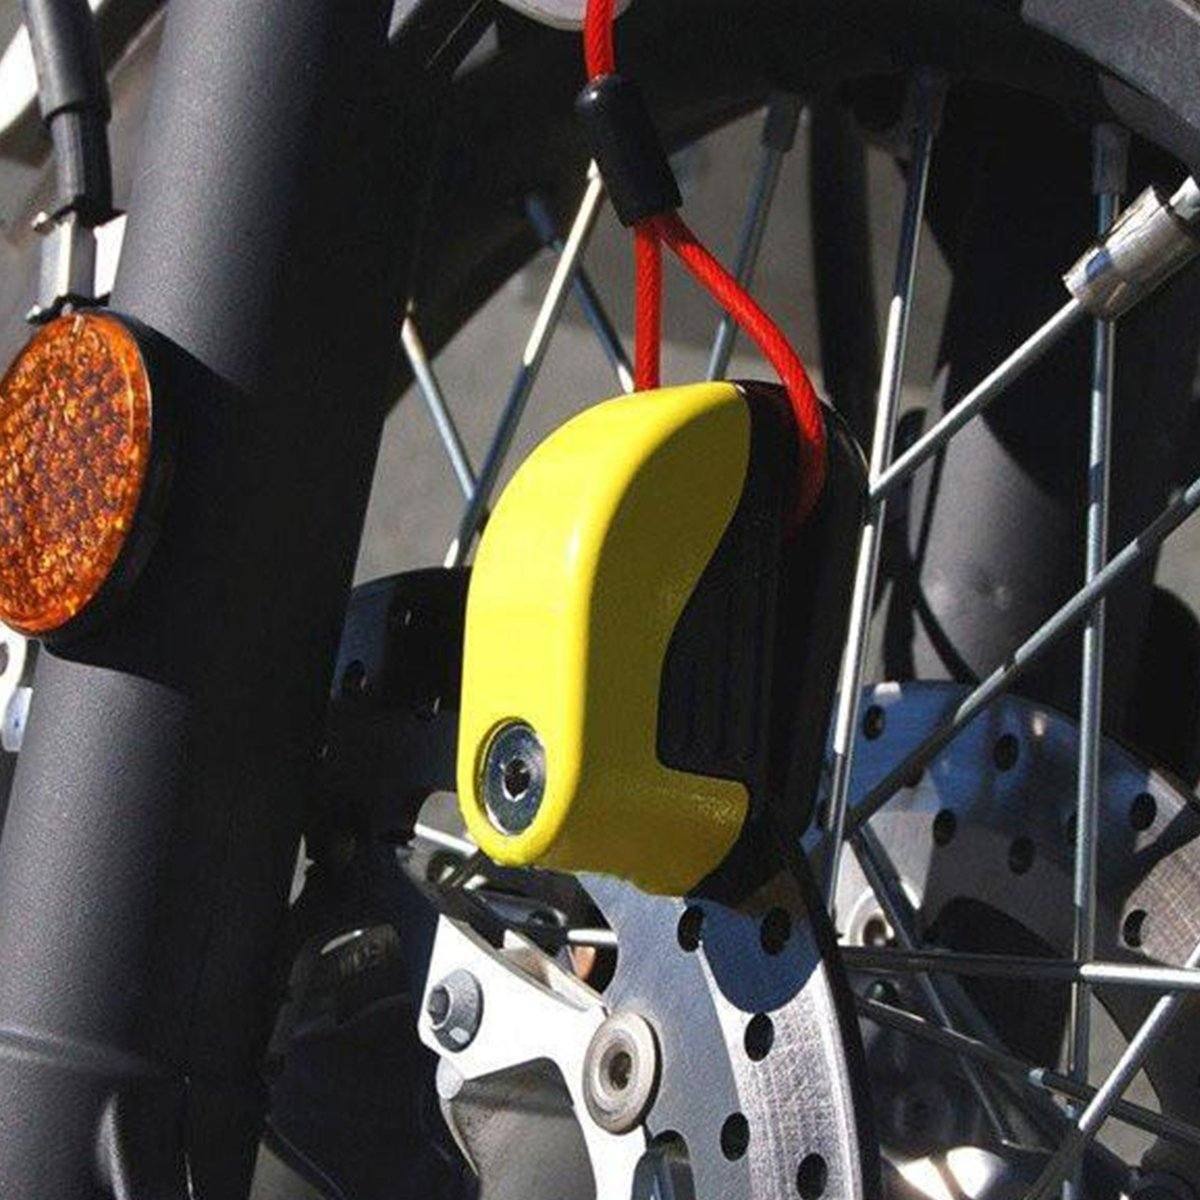 A close up of a Motorcycle Alarm Disc Lock with a yellow light attached to it.